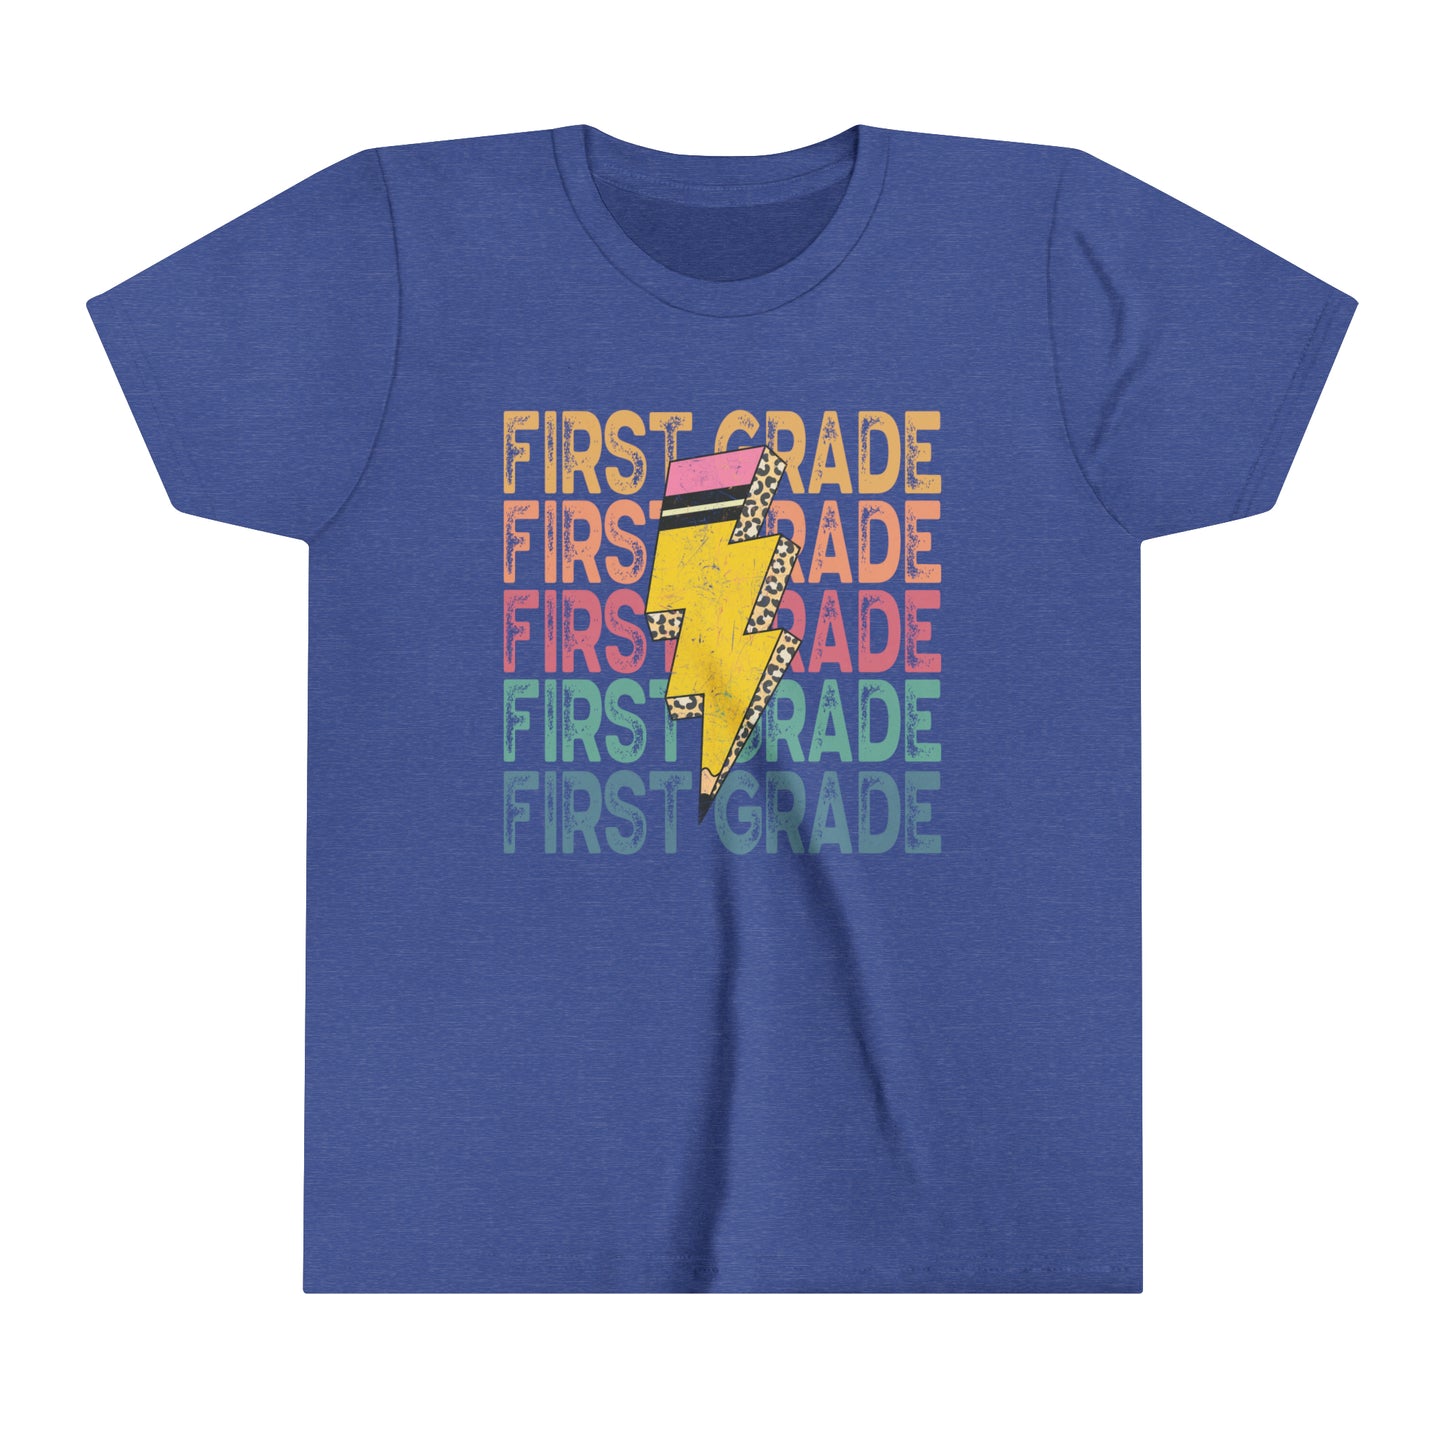 First Grade Girl's Youth Short Sleeve Tee